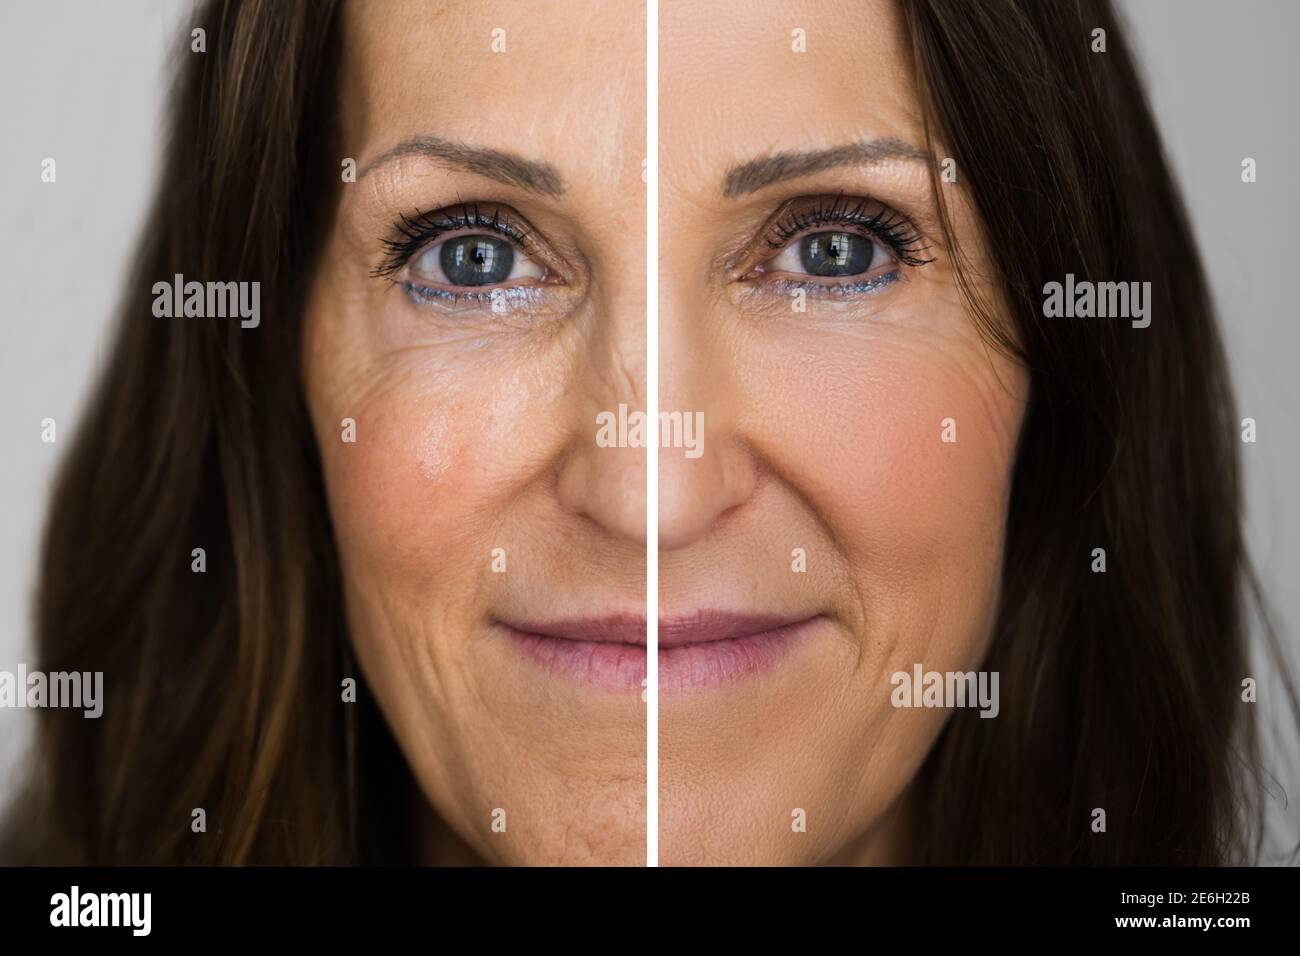 Anti Rejuvenation Wrinkles Lift Before And After Stock Photo